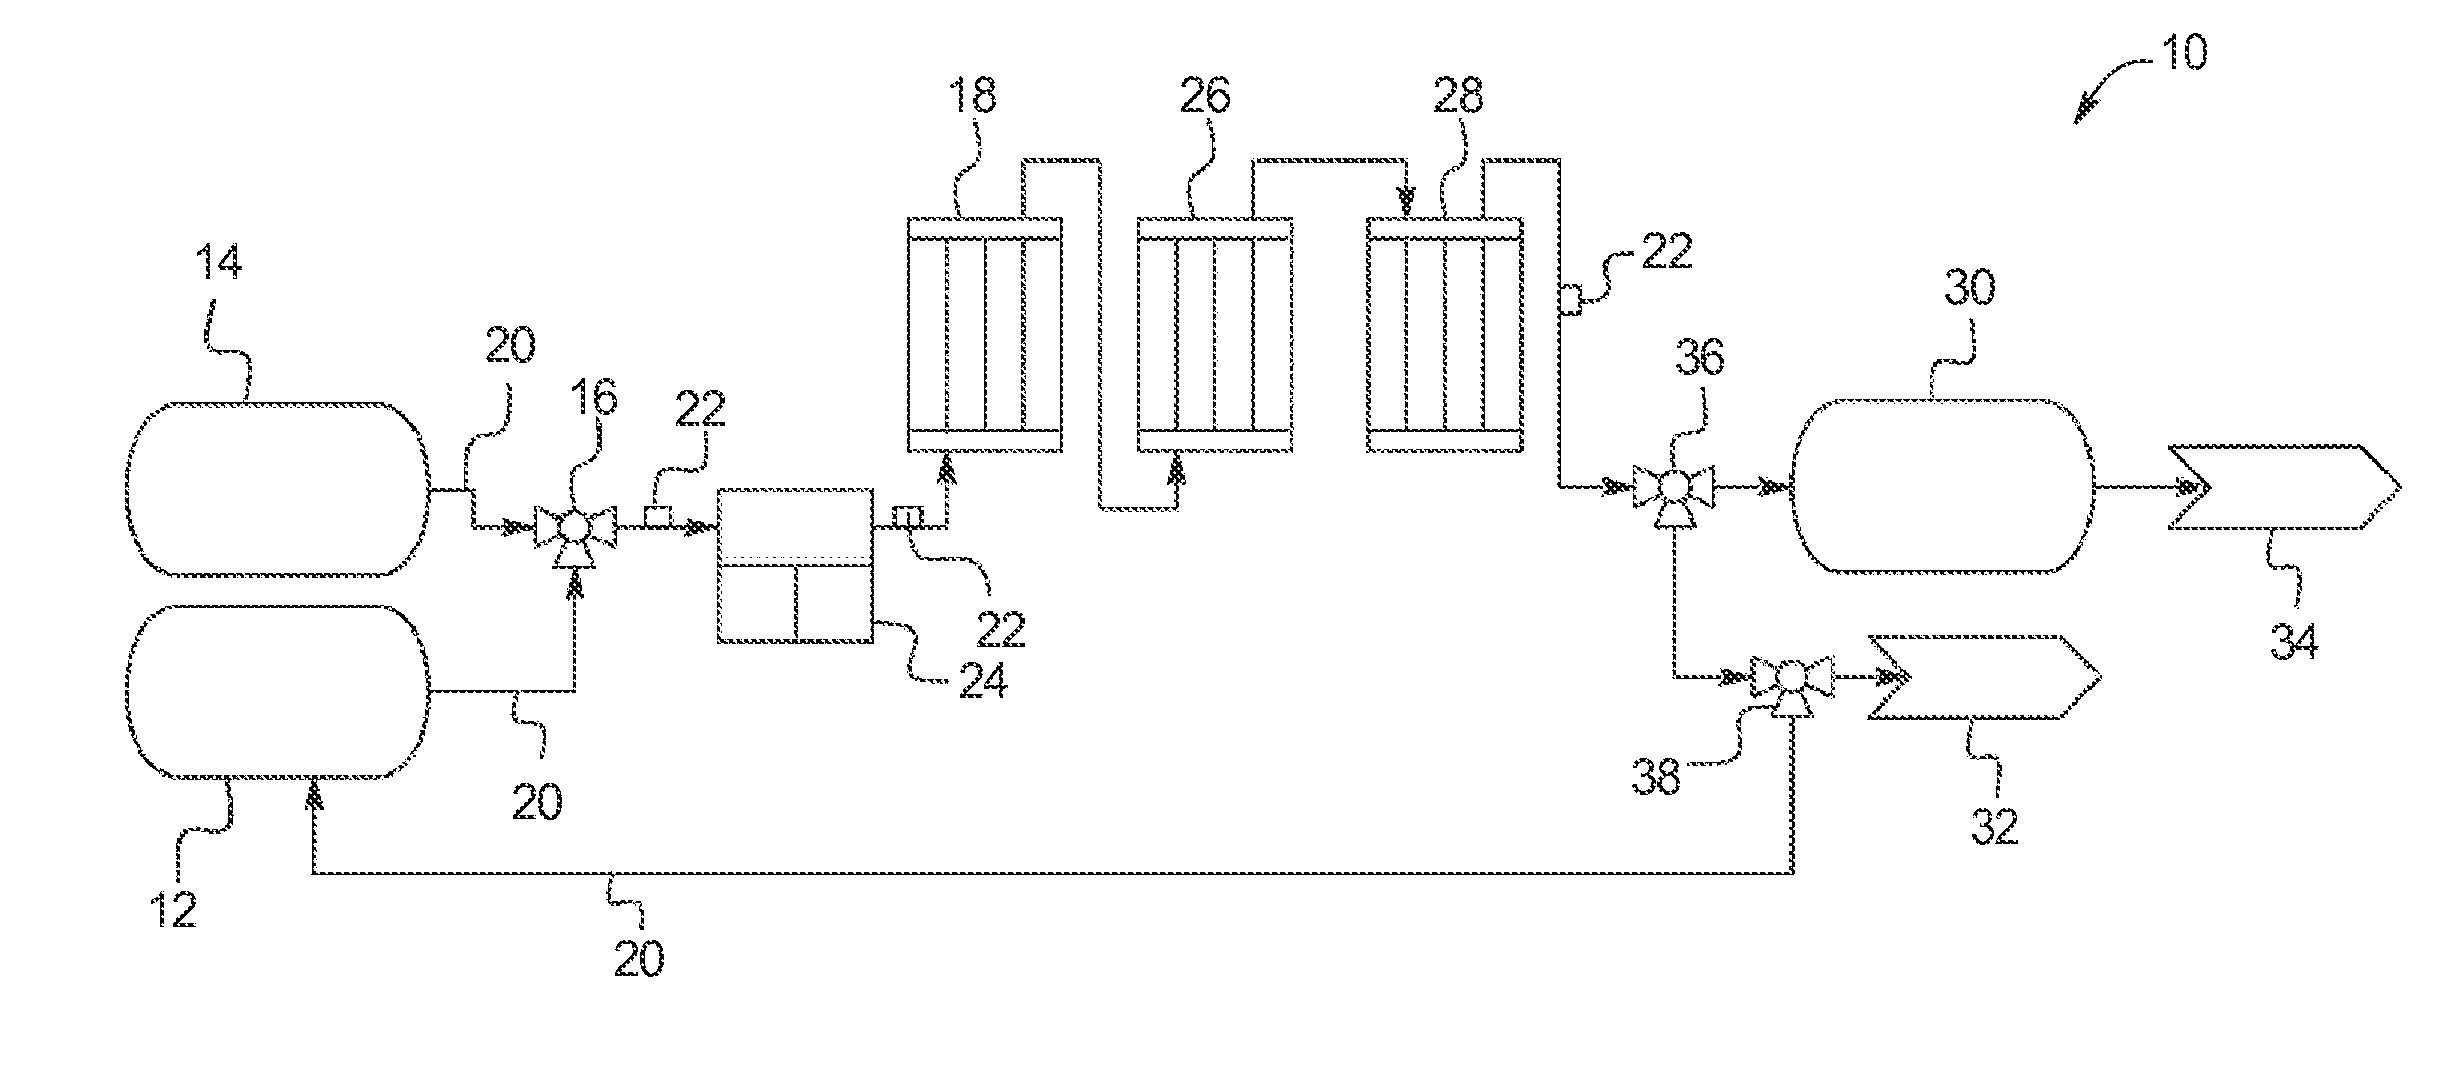 Systems and methods for detecting water/product interfaces during food processing